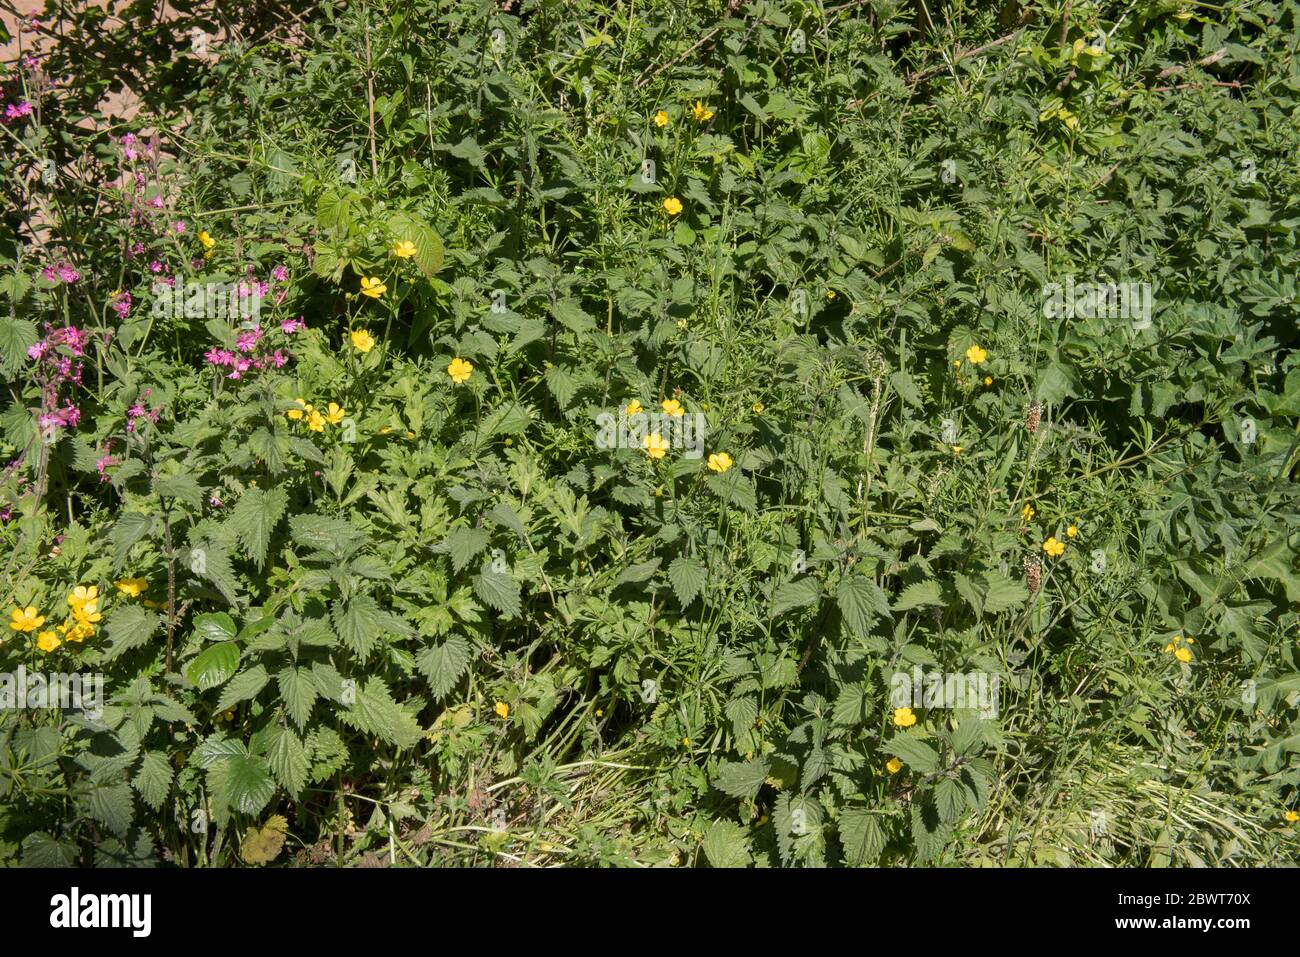 Spring Flowering Wildflowers and Weeds (Buttercups, Red Campion, Common Stinging Nettles, Bramble and Cleavers ) Growing on a Grassy Roadside Bank Stock Photo